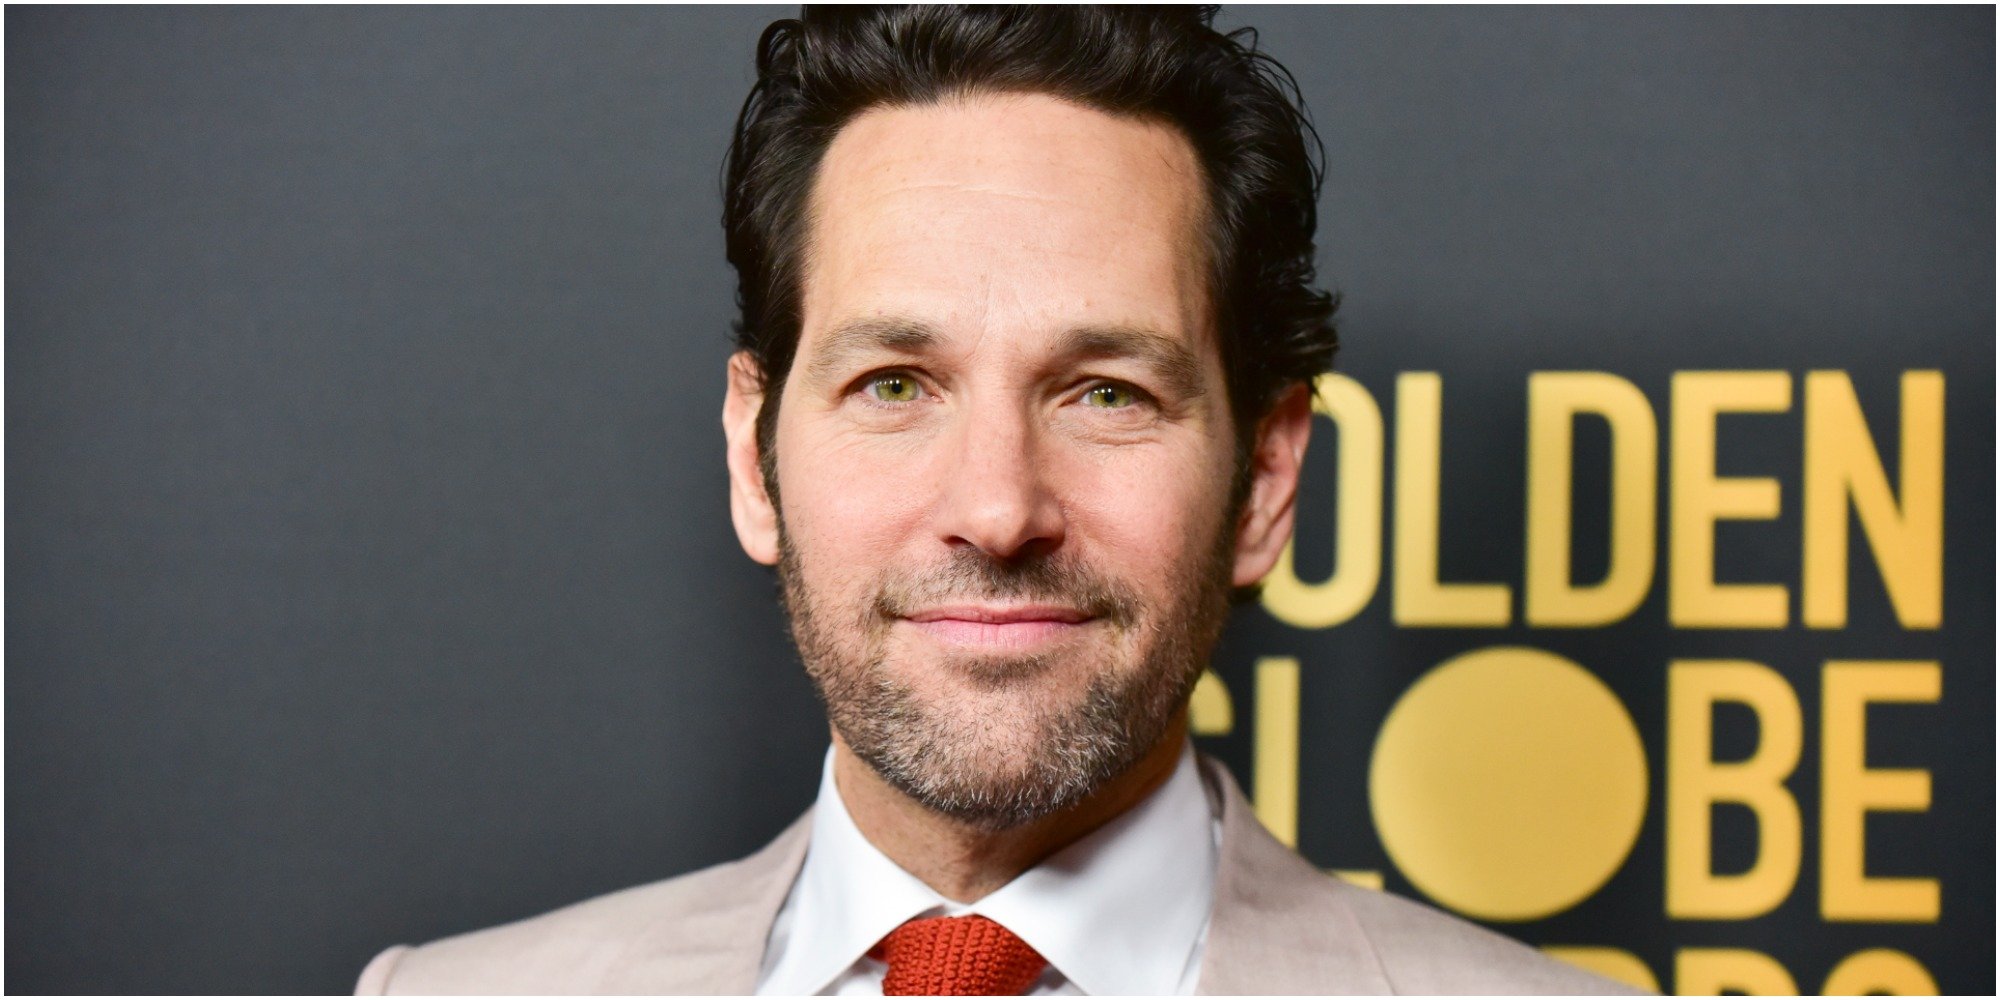 Paul Rudd poses on the red carpet.